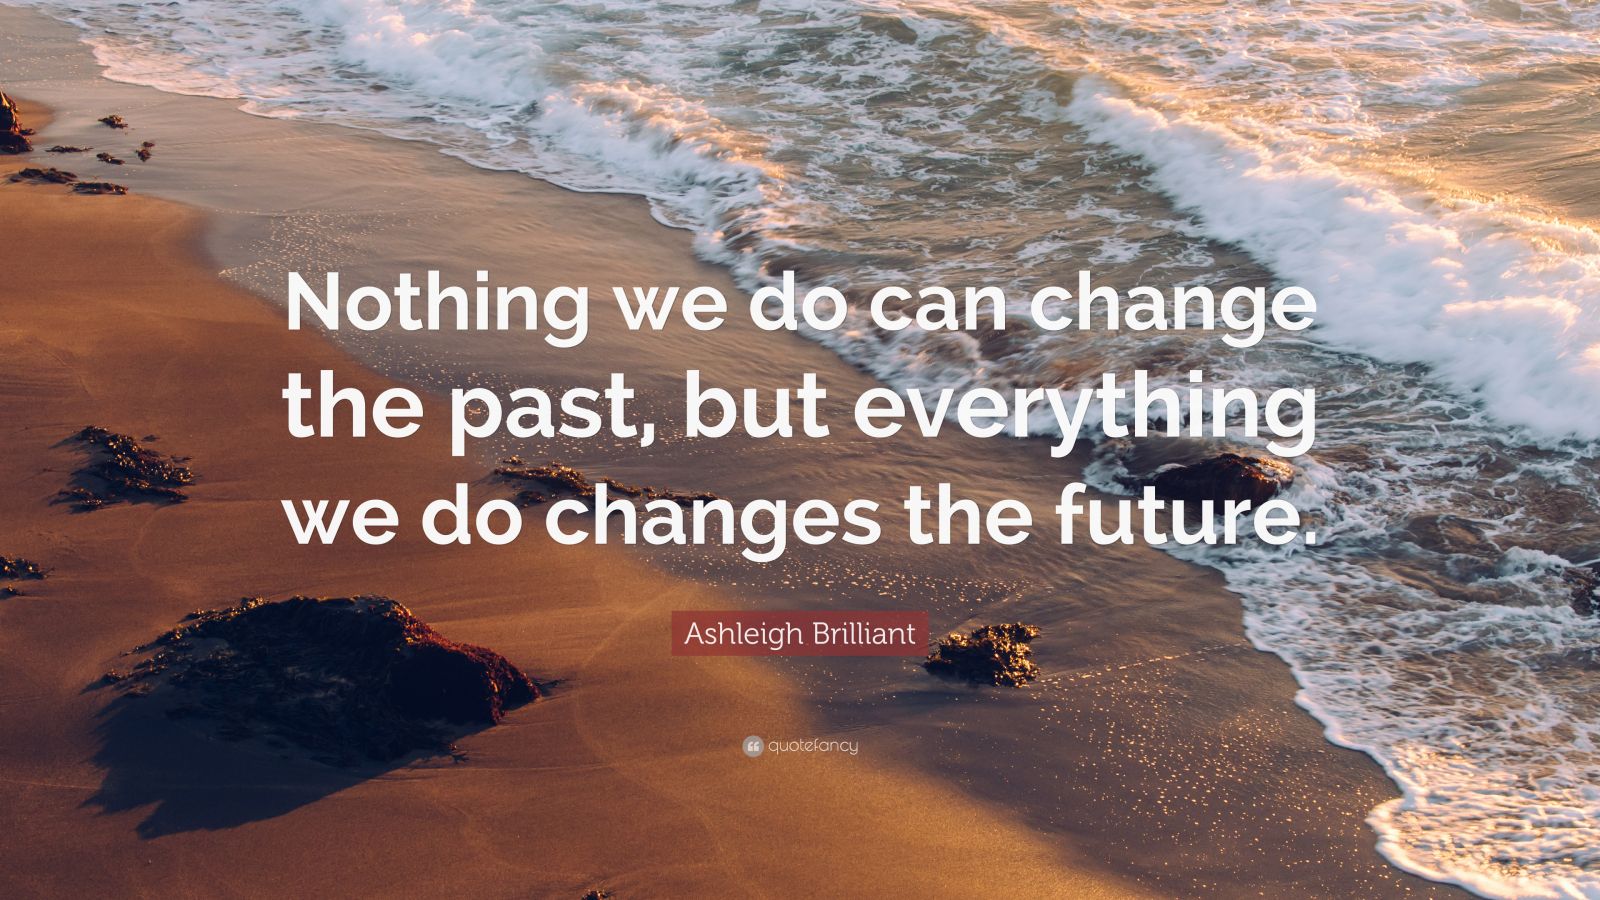 Ashleigh Brilliant Quote “Nothing we do can change the past, but